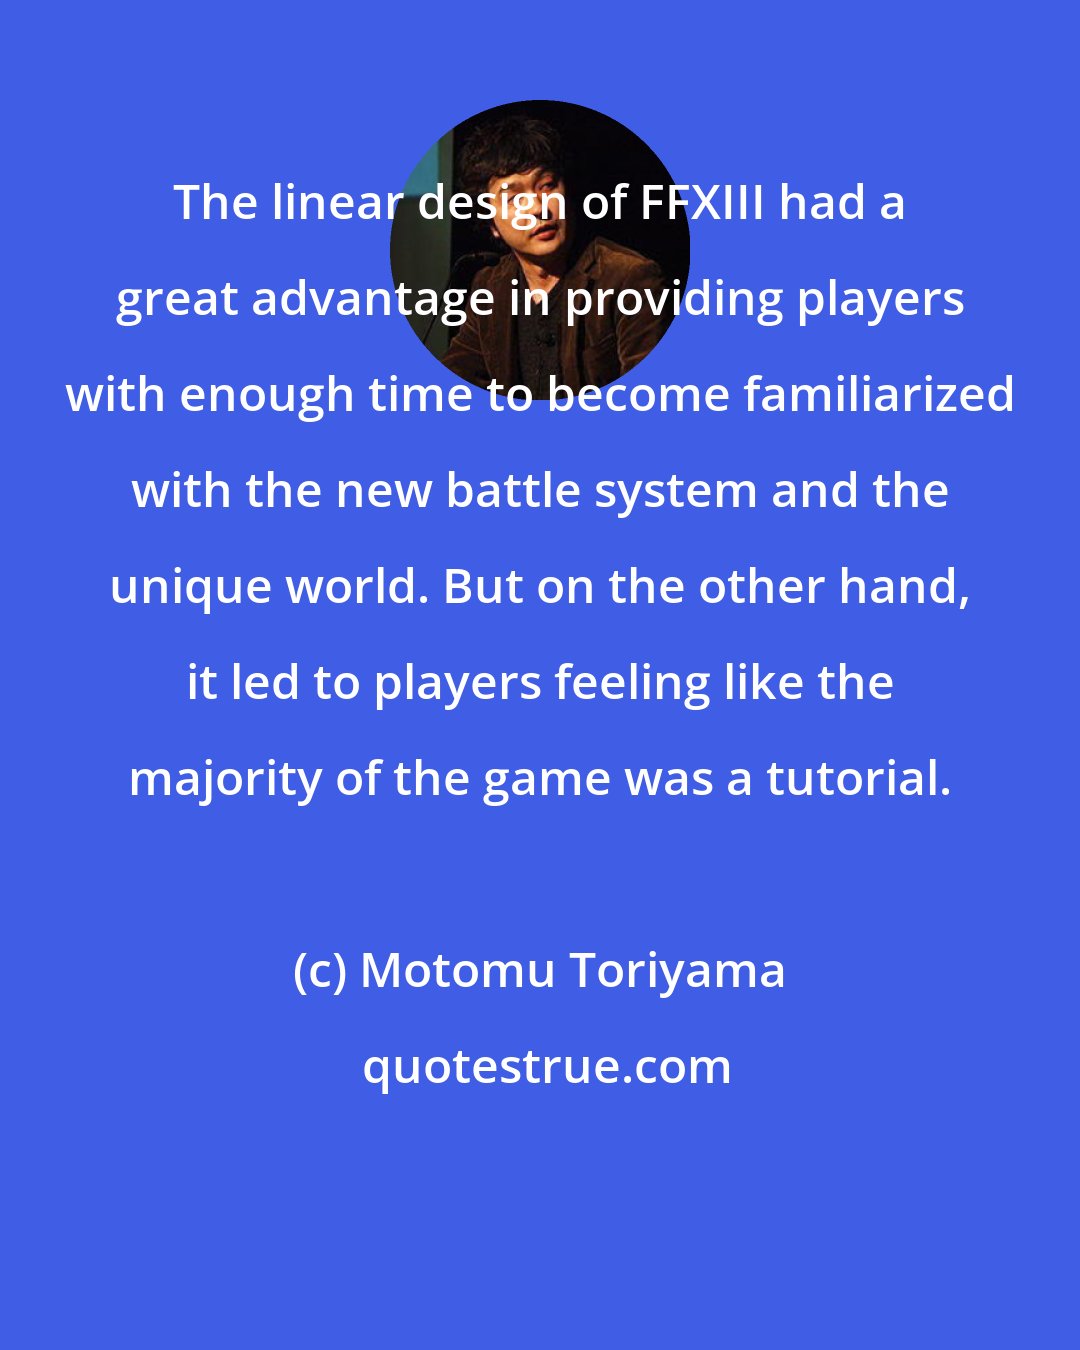 Motomu Toriyama: The linear design of FFXIII had a great advantage in providing players with enough time to become familiarized with the new battle system and the unique world. But on the other hand, it led to players feeling like the majority of the game was a tutorial.